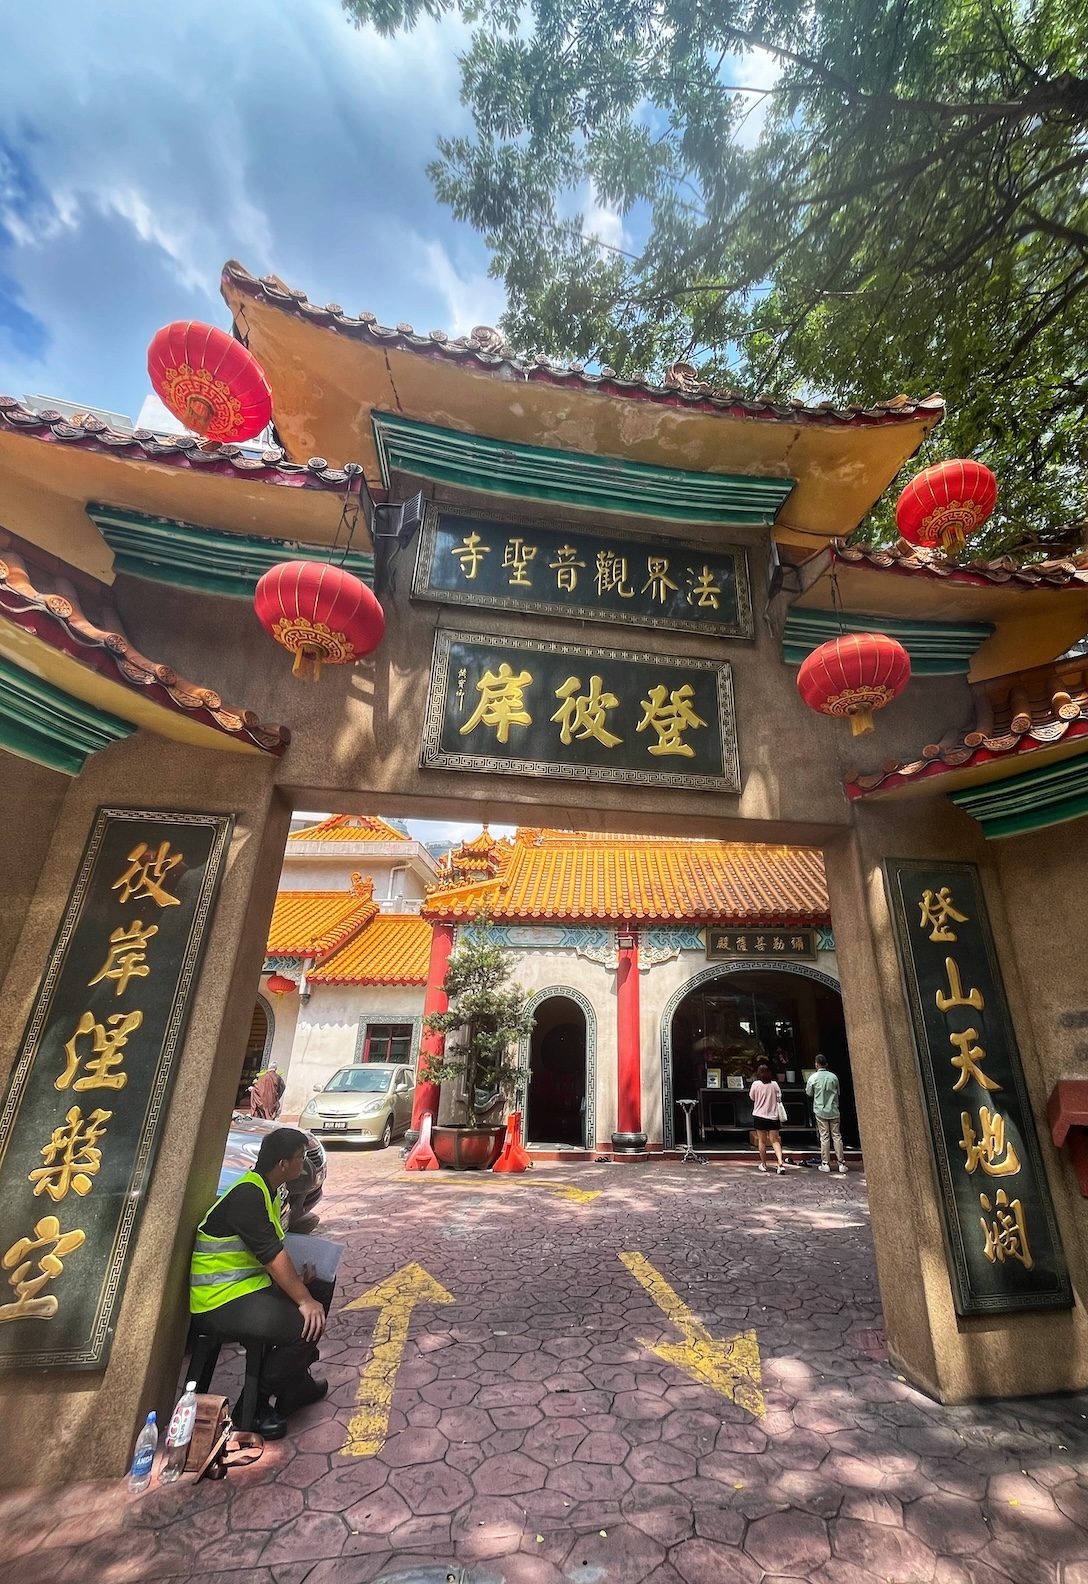 Entrance to the Dharma Realm Guan Yin Sagely Monastery in Kuala Lumpur, Malaysia, featuring traditional Chinese architectural elements, red lanterns, and gold inscriptions. Two people are sitting near the entrance, and visitors can be seen entering the monastery.